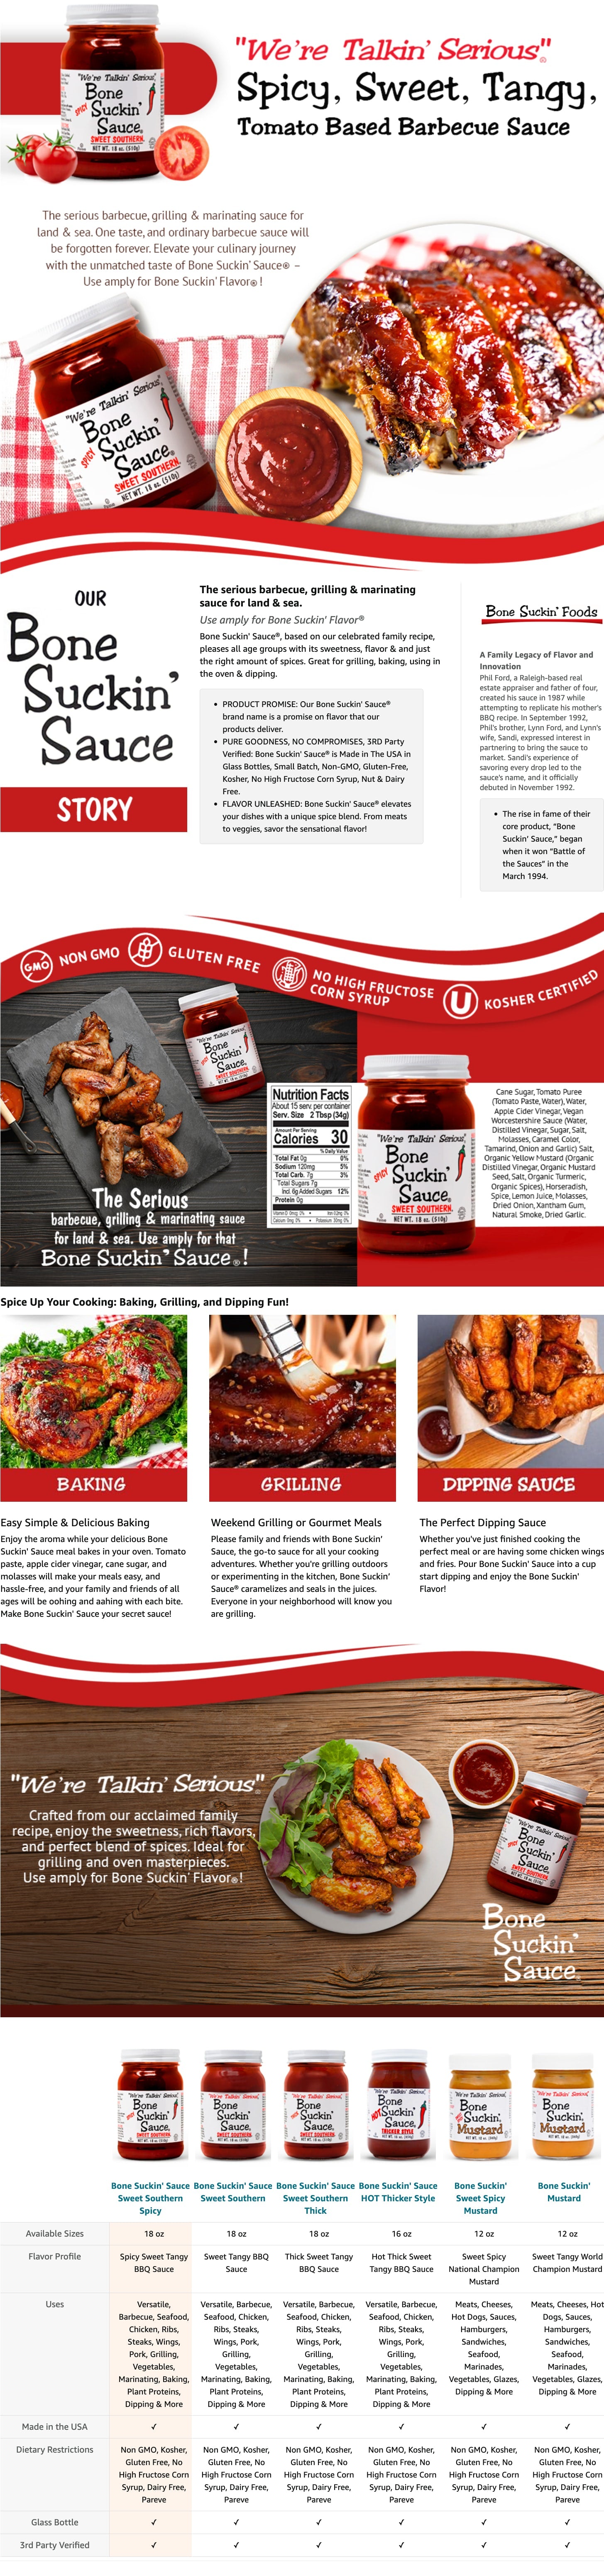 Bone Suckin' Sauce Sweet Southern Spicy BBQ Sauce - 18 oz in Glass Bottle, For Ribs, Chicken, Pork, Beef - Gluten-Free, Non-GMO, Kosher, Spicy Barbecue Sauce Sweetened with Cane Sugar & Molasses.